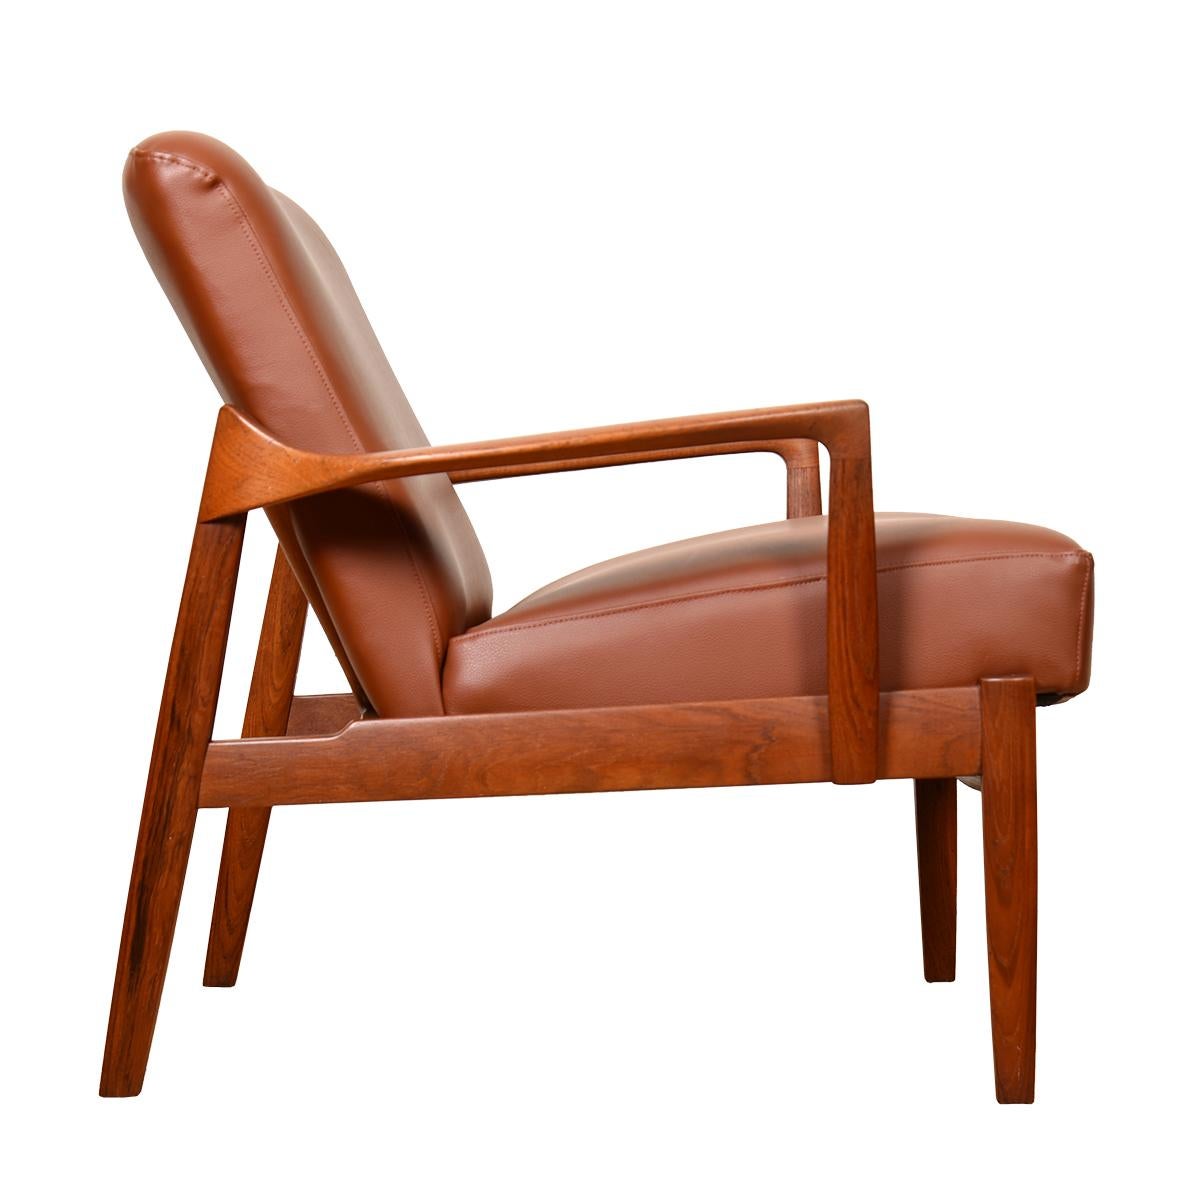 20th Century Danish Teak Frame + Leather Cushions Lounge Chair by Tove & Edvard Kindt-Larsen For Sale